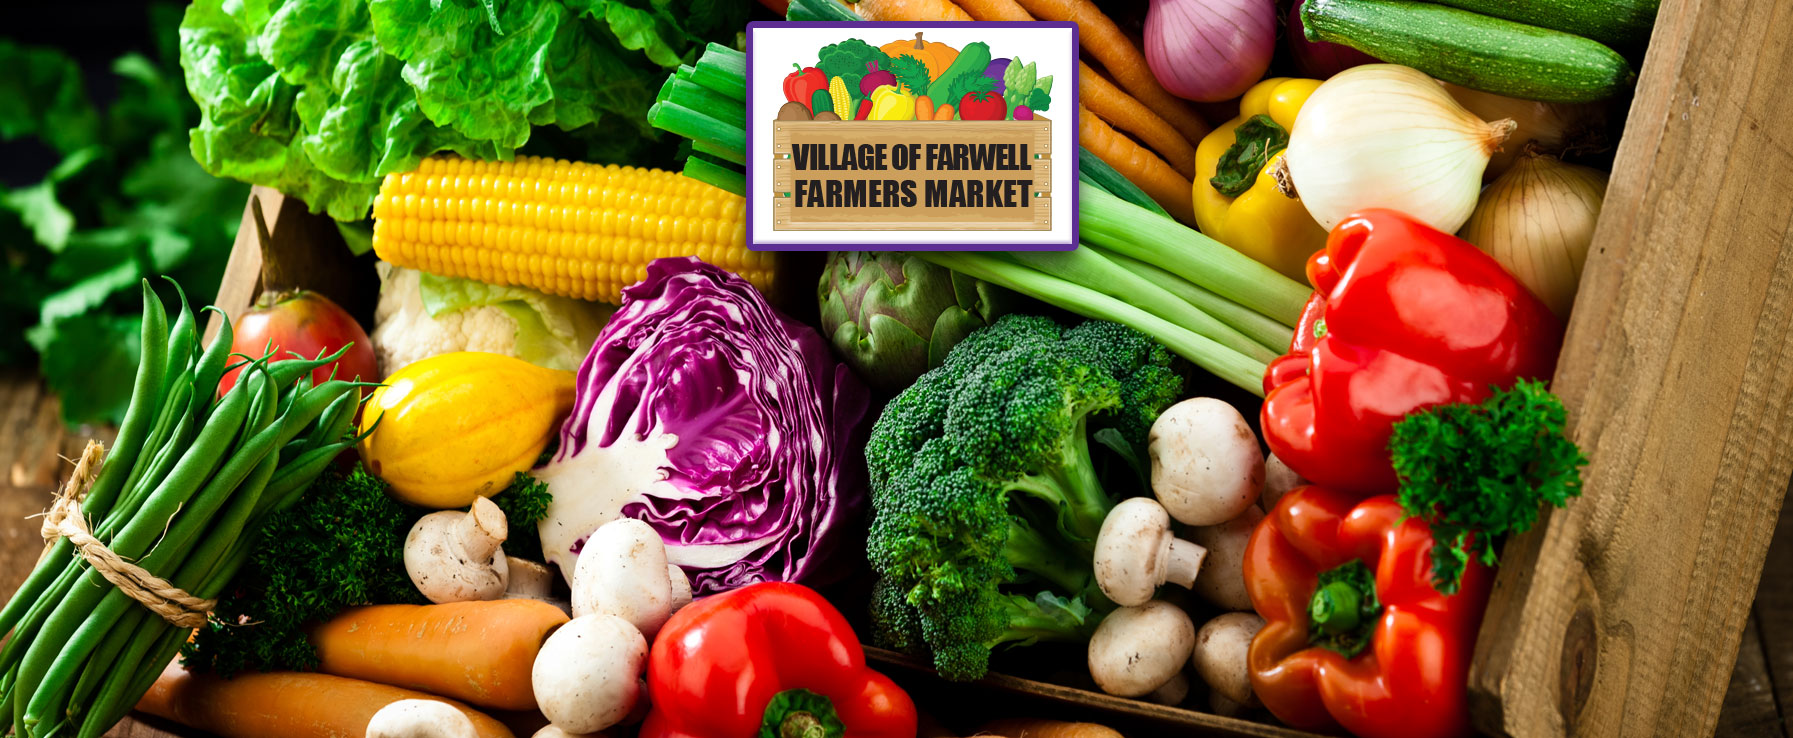 Welcome to Farwell Farmers' Market